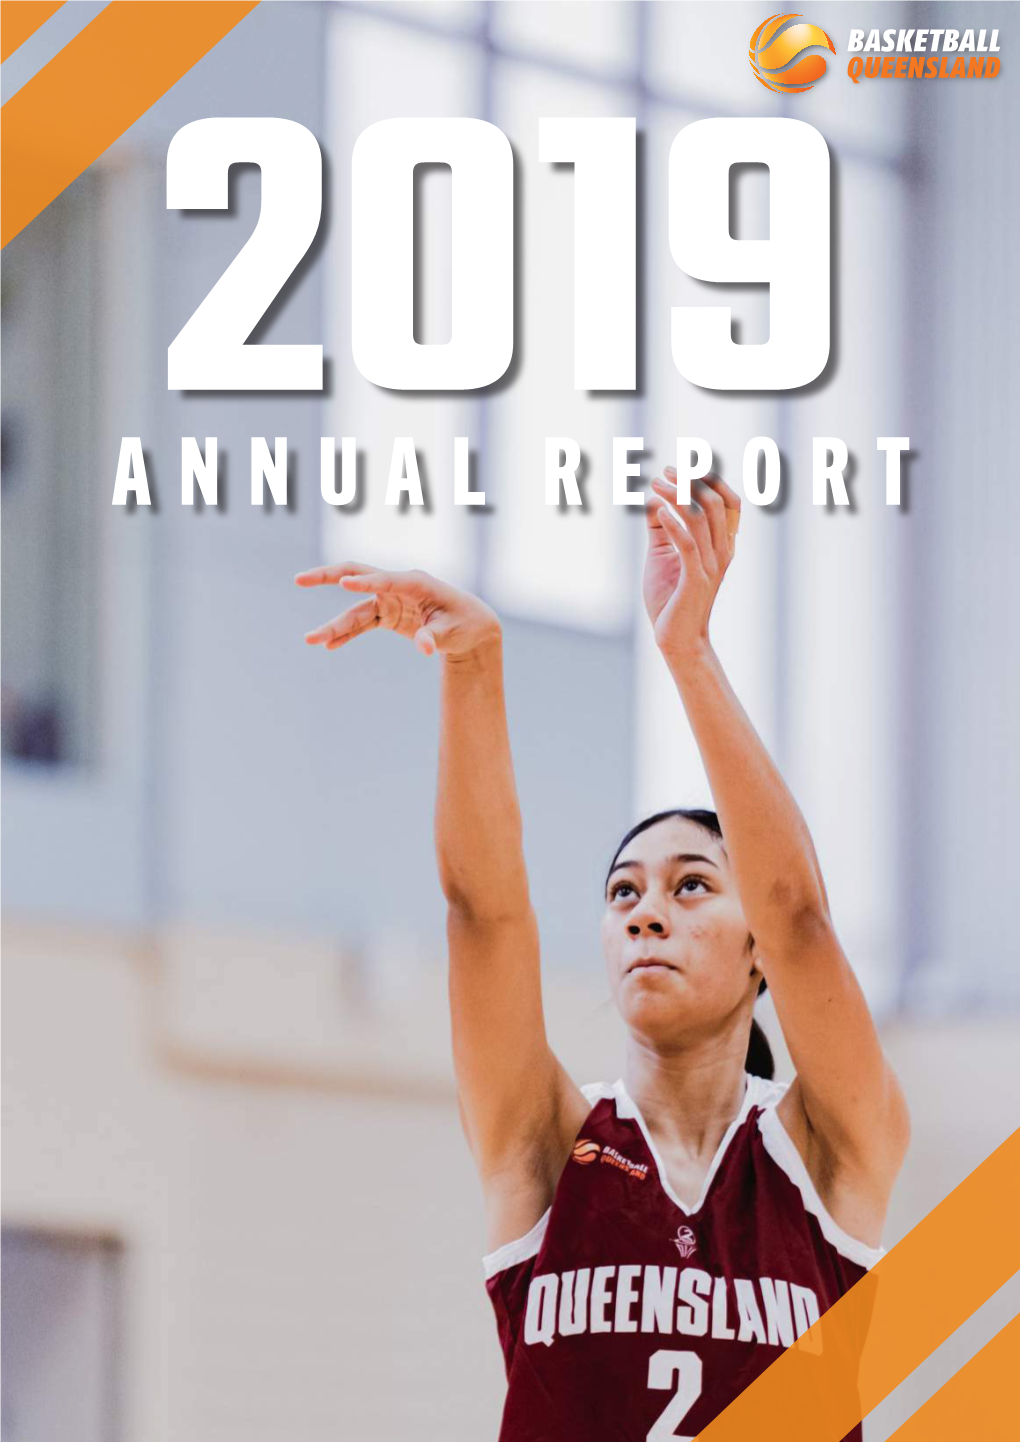 2019 State Sport and Recreation Organisation Development Program to Get More Queenslanders Active Through Sports and Recreation